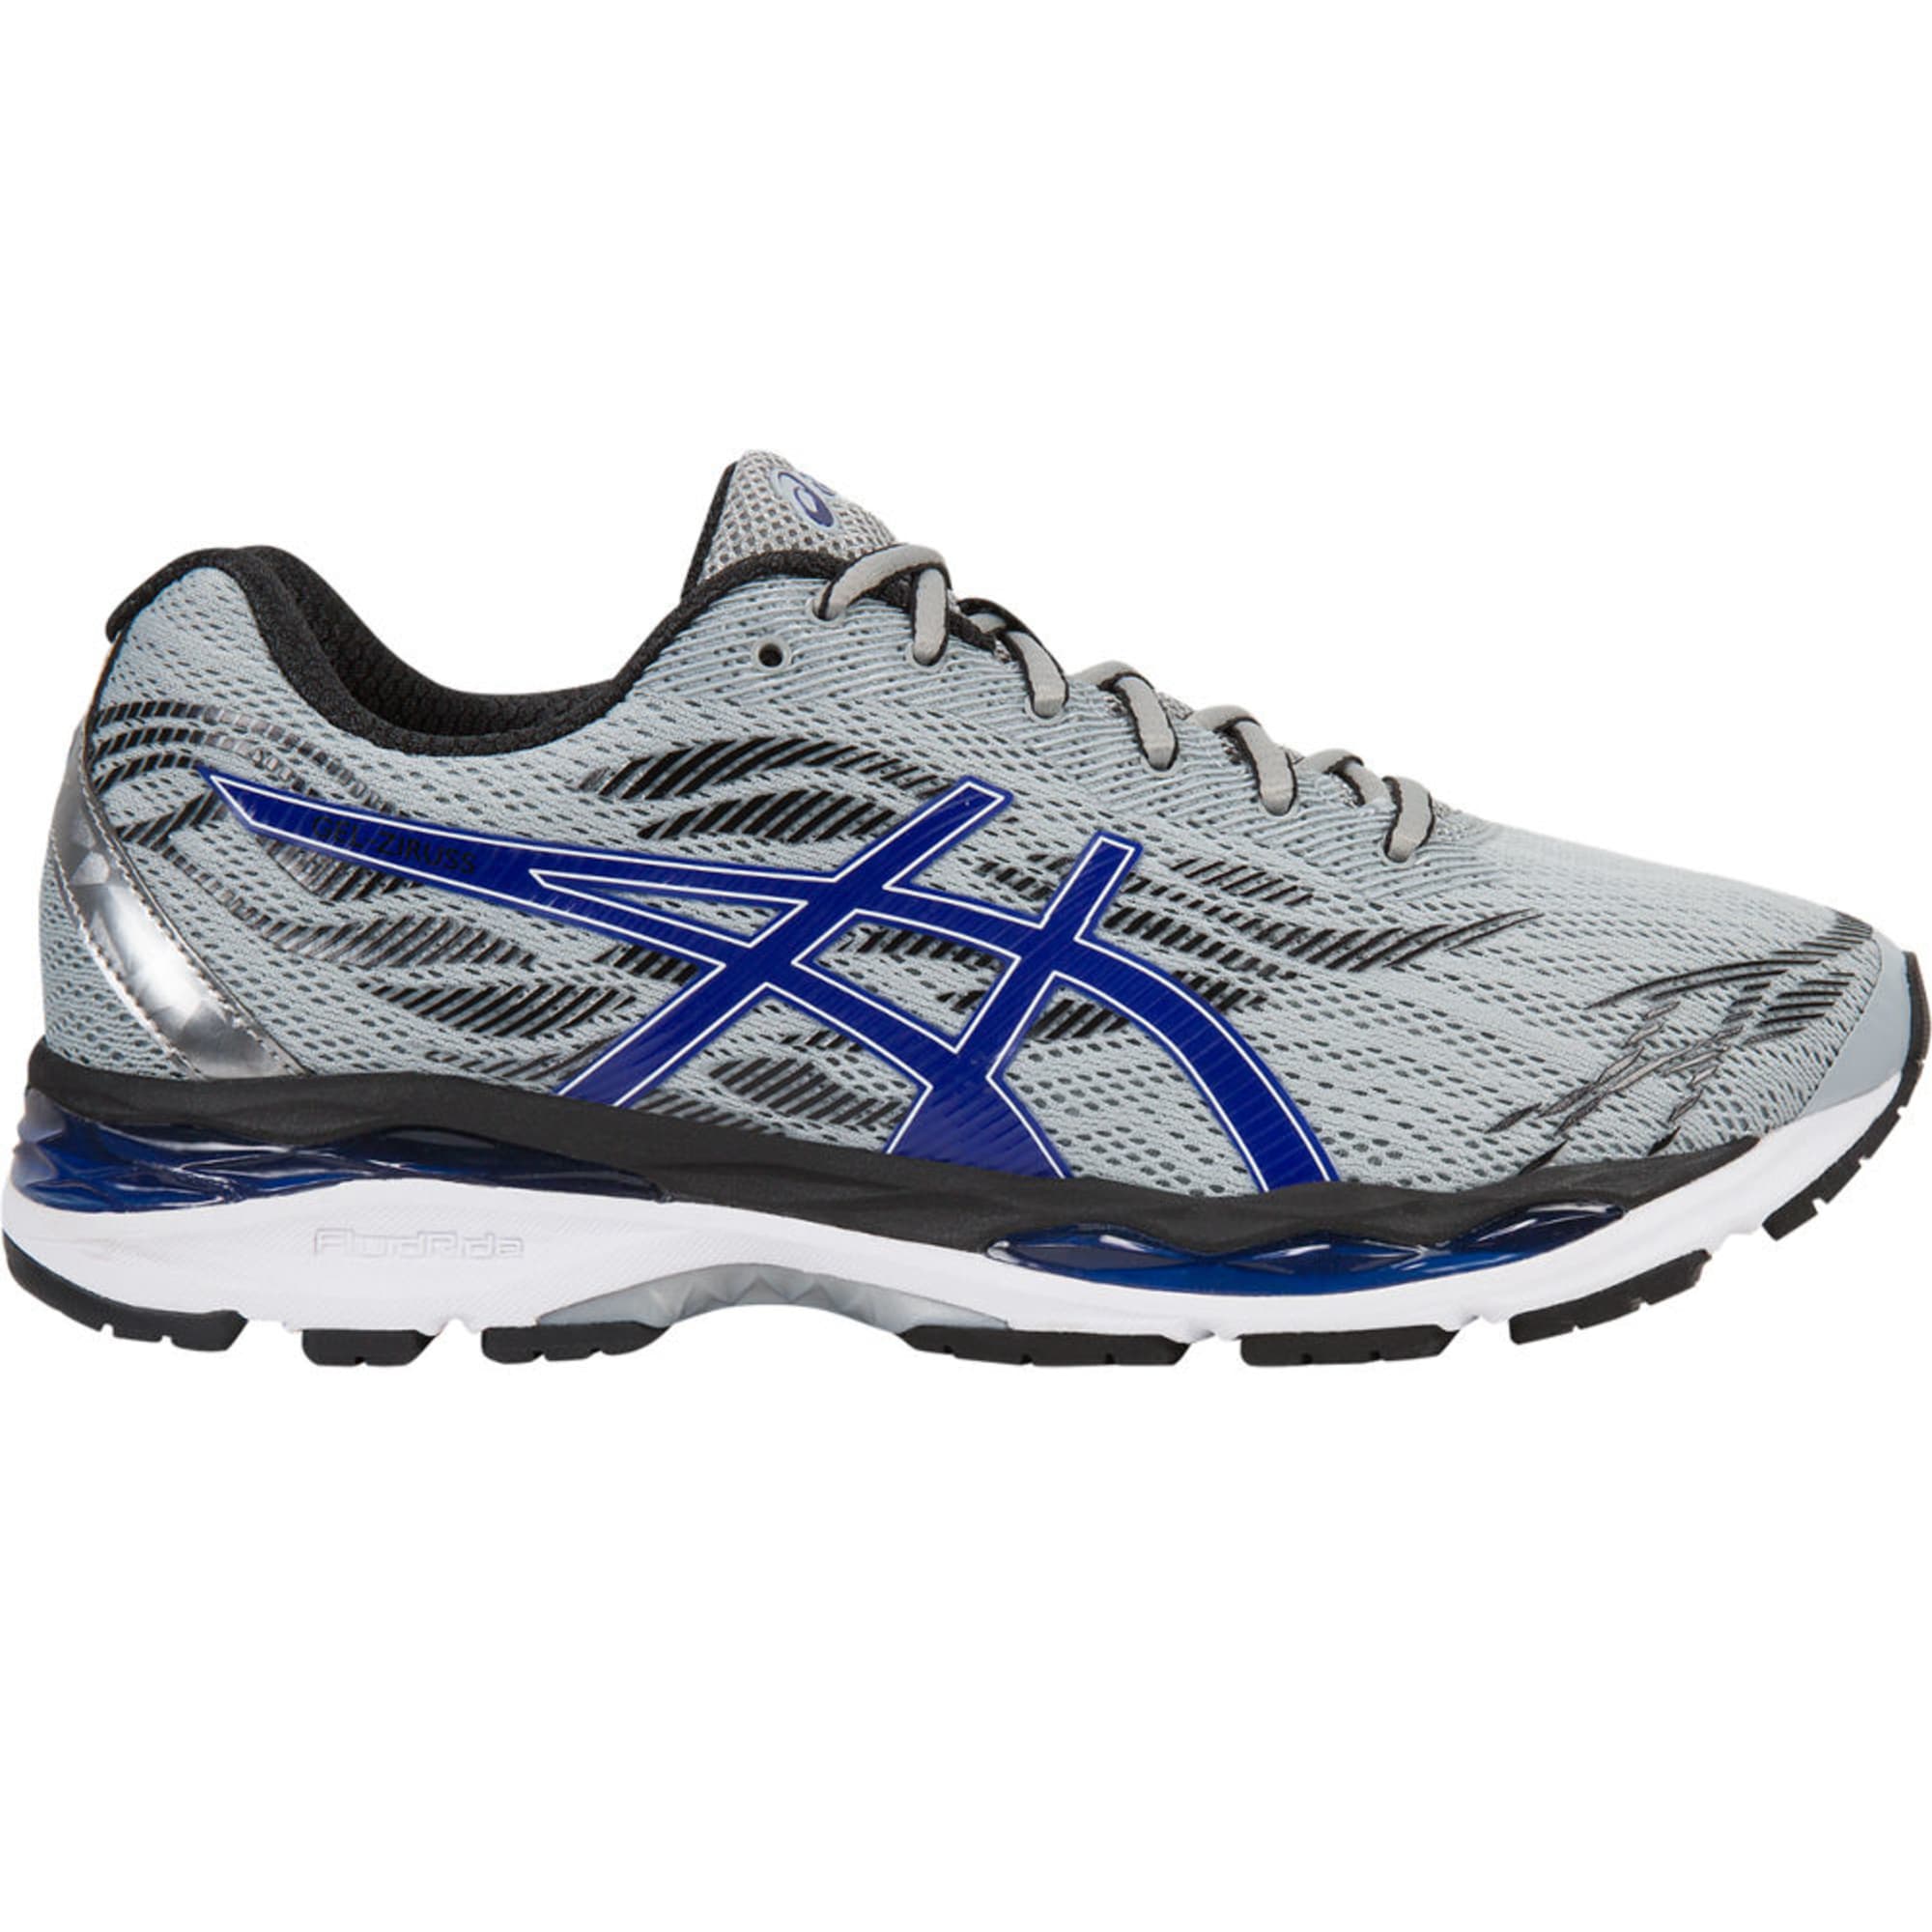 Men's Running Shoes - Stores